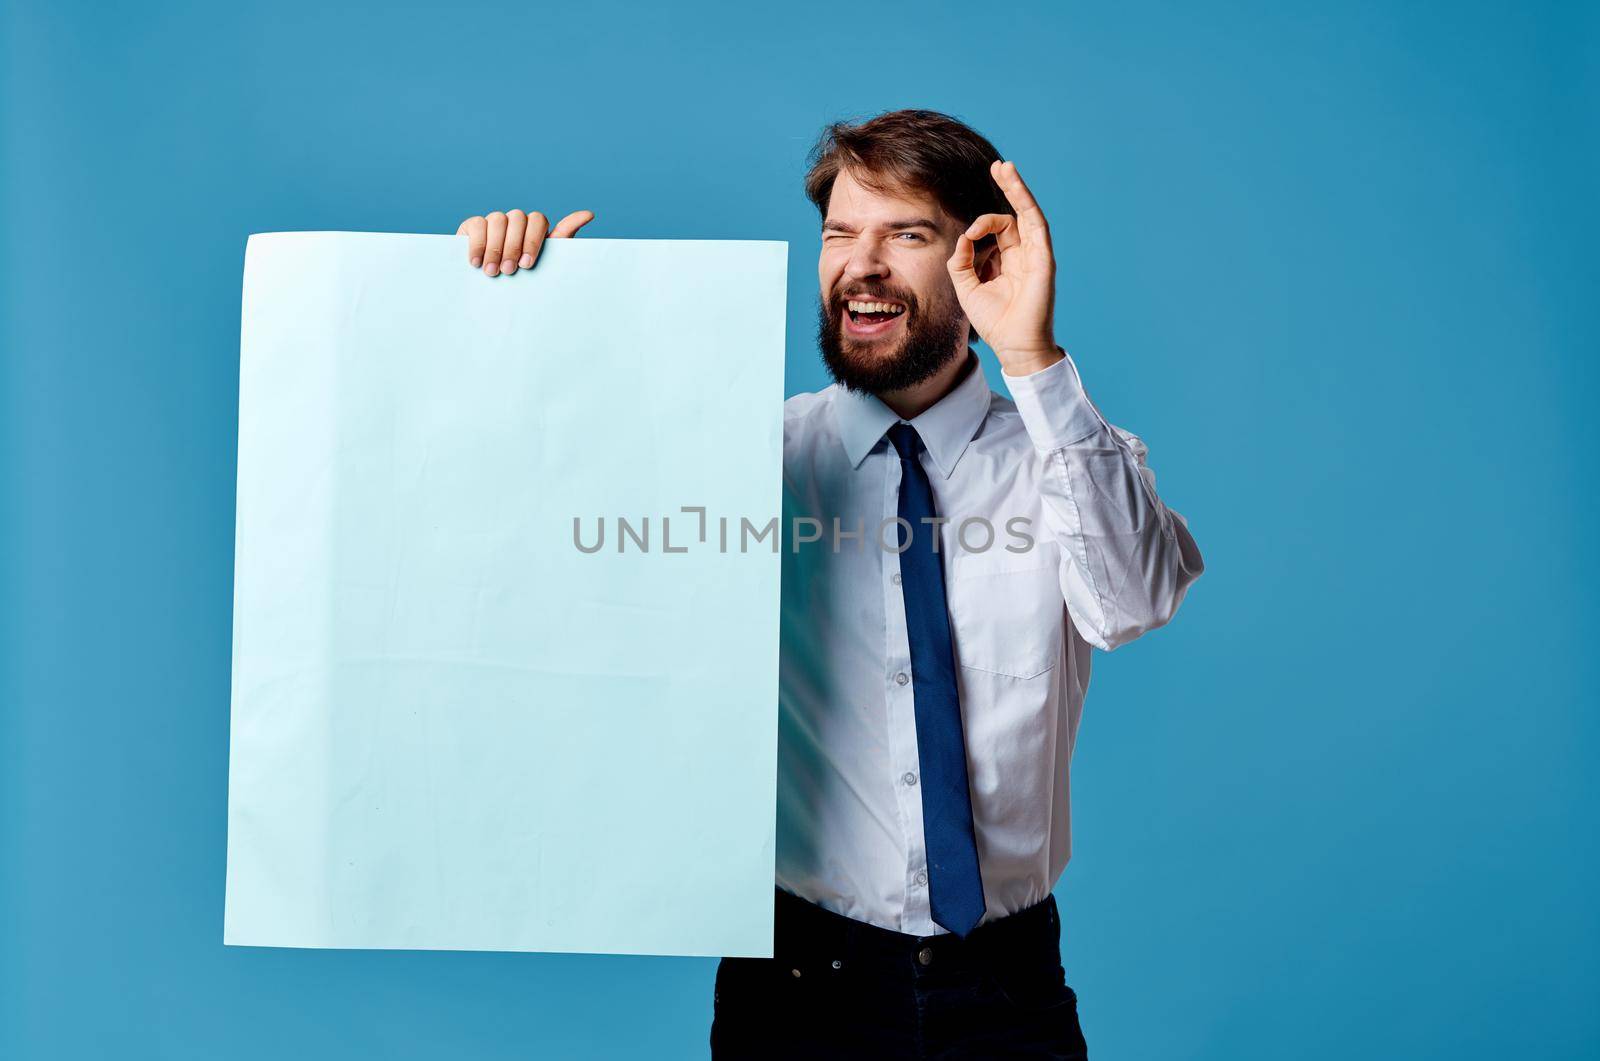 man in shirt with tie banners in the hands of an official advertising marketing by SHOTPRIME